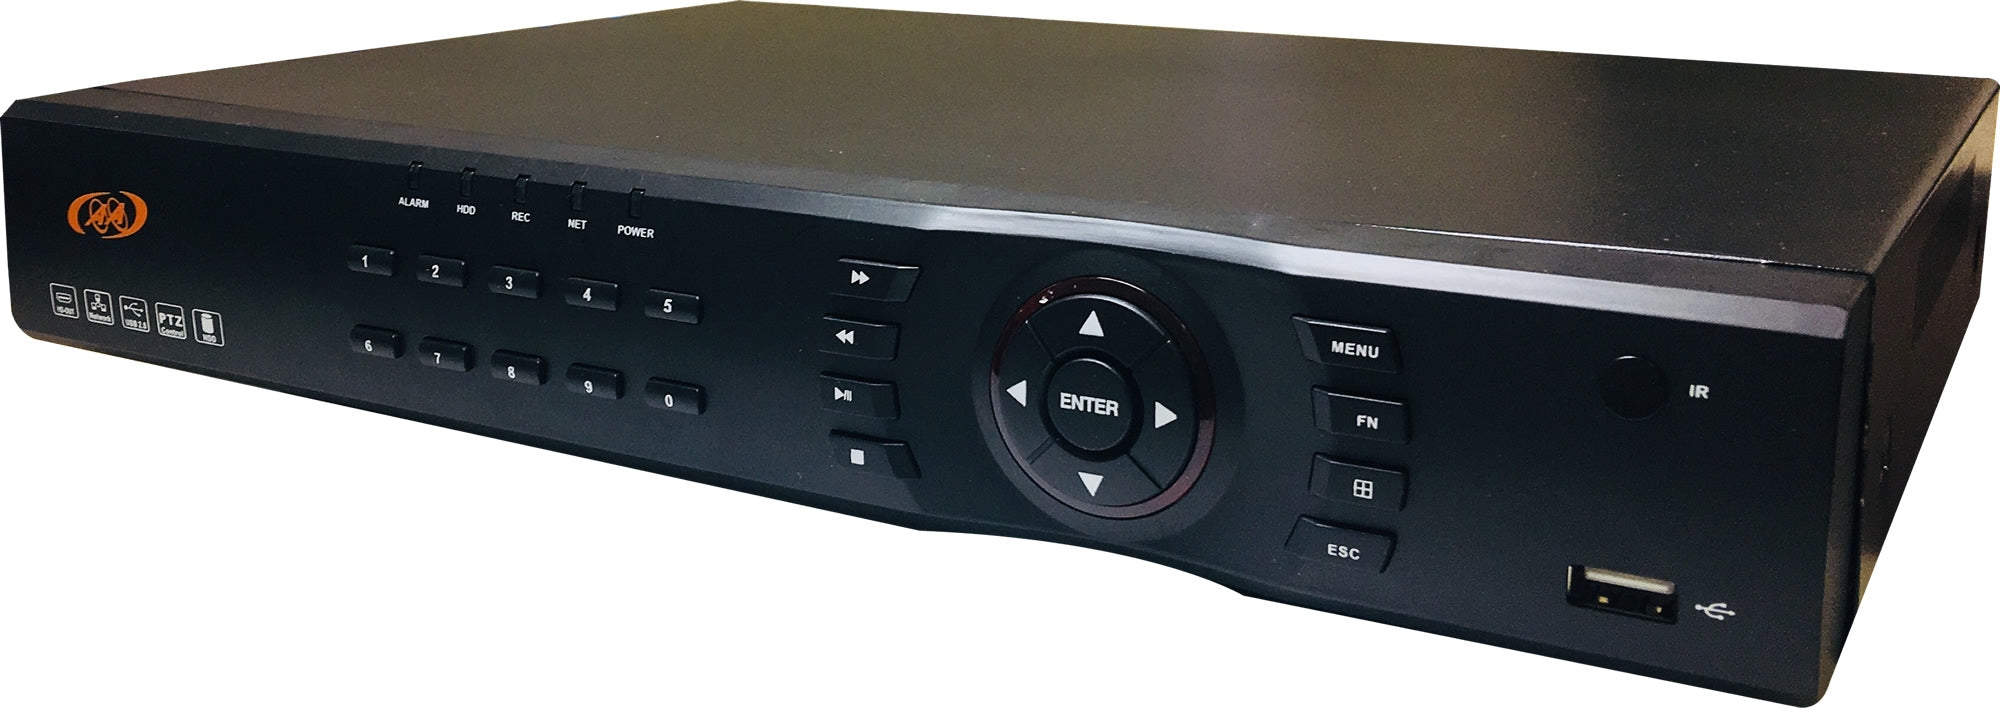 23-4410-16 Network Video Recorder 16 Channels 8 Ports PoE H.264 NVR